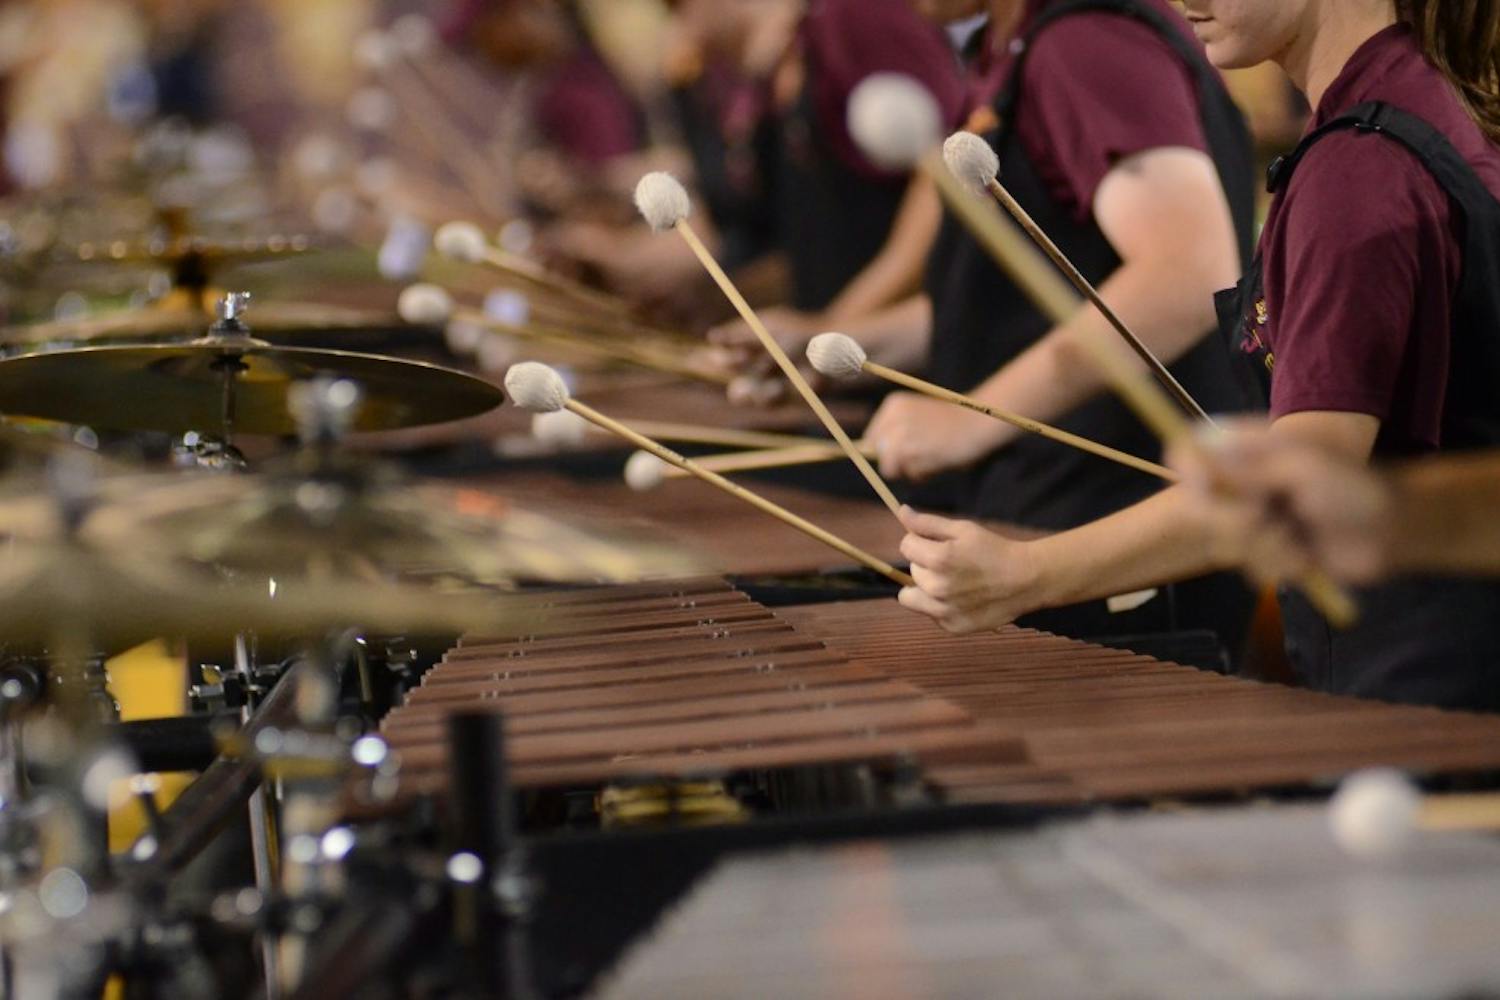 Percussionists in the ASU marching band play a number as they practice before a football game in Tempe. The band consists of percussionists, horn players, dancer as well as a full drum line. (Photo by State Press Staff)